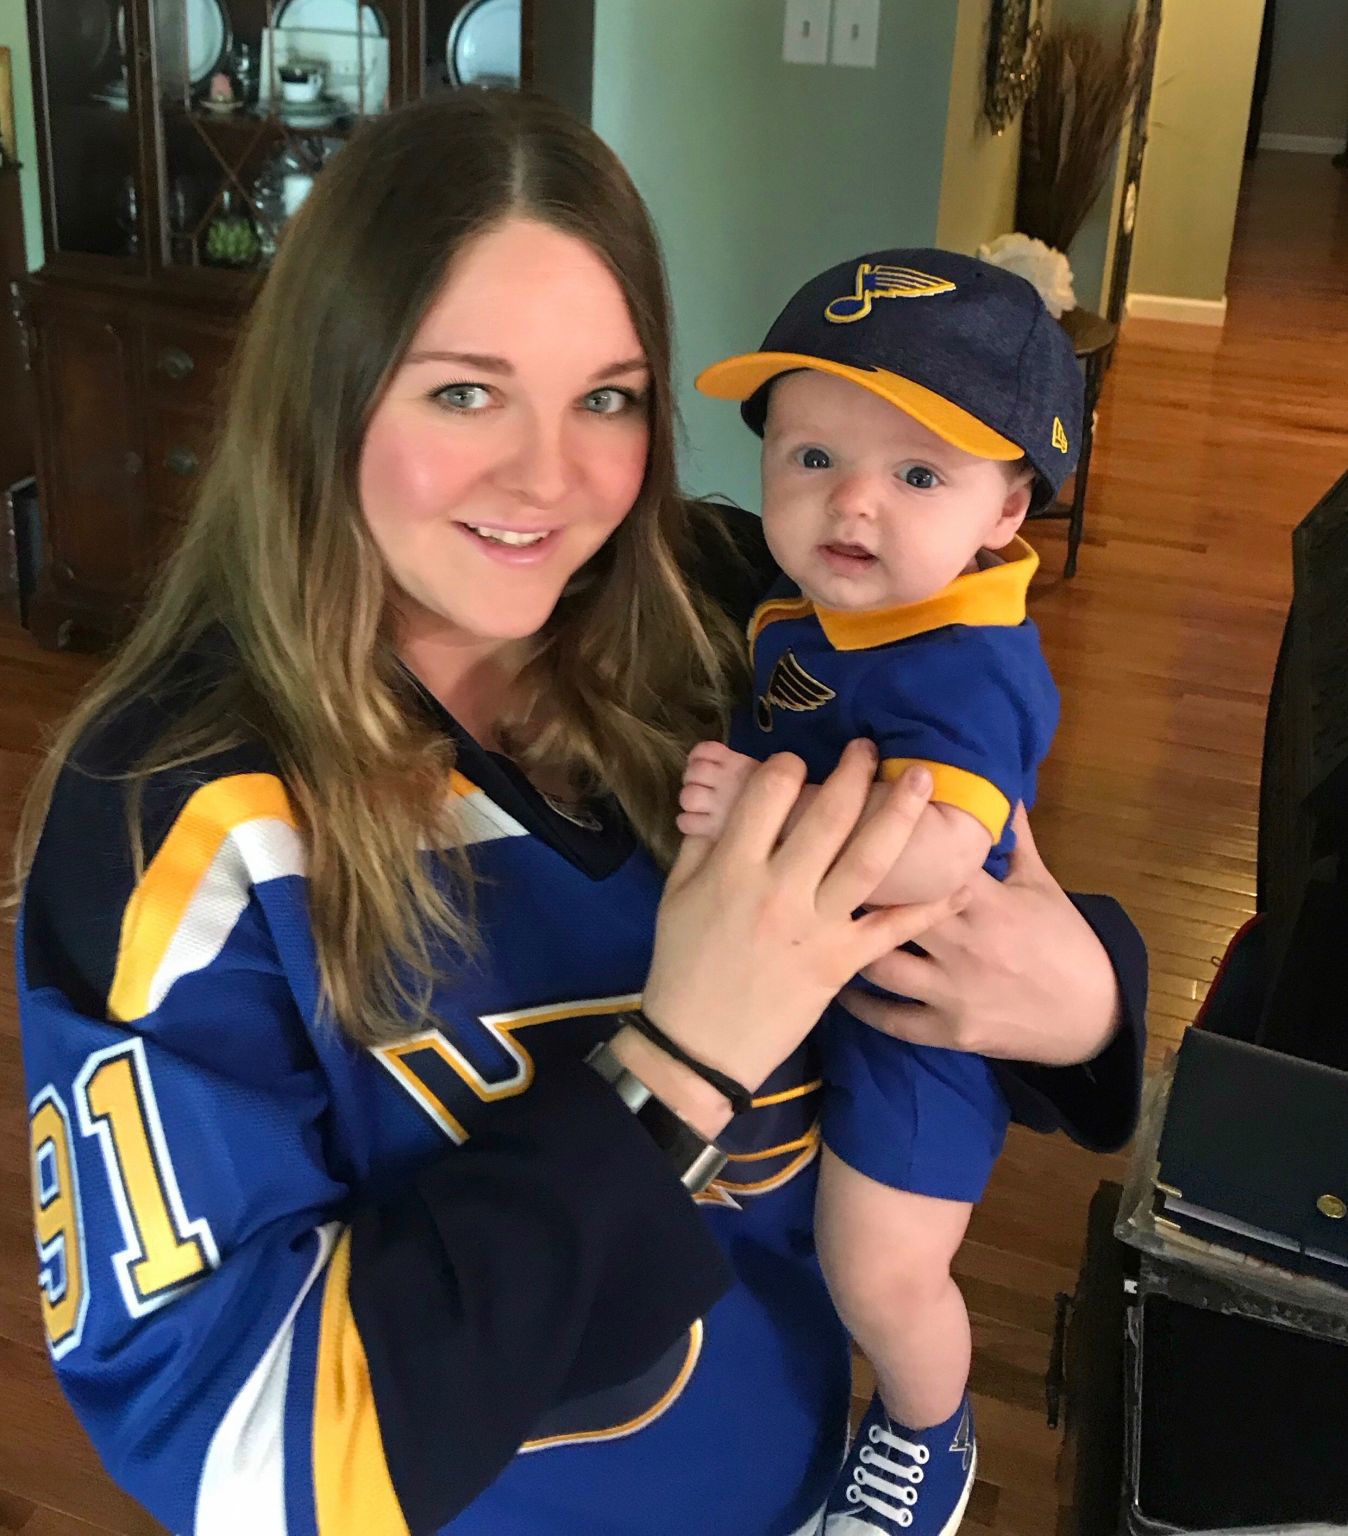 The Blues baby is back. His parents say 